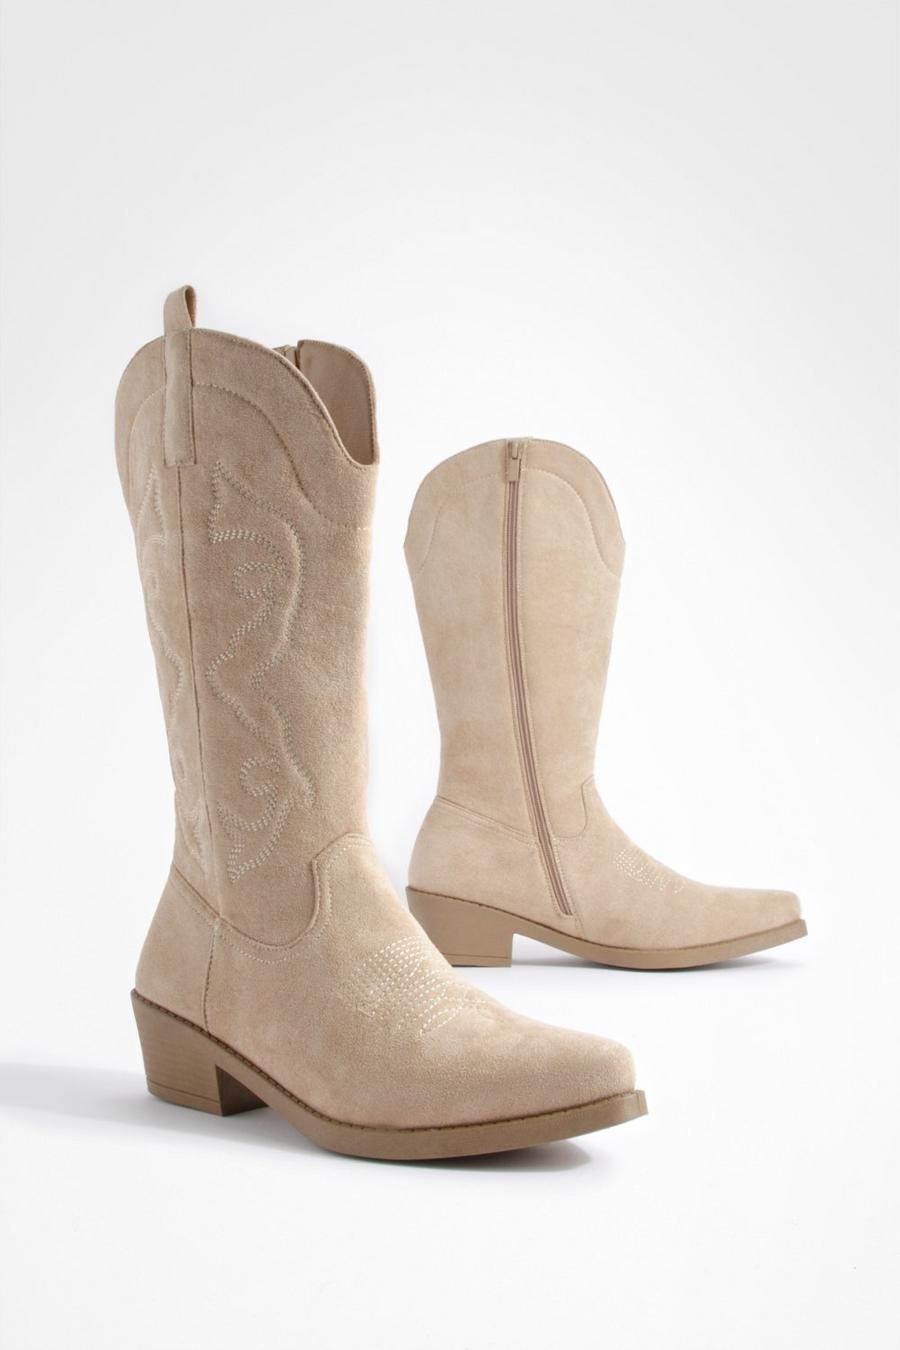 Taupe Stitch Detail Low Western Cowboy Boots